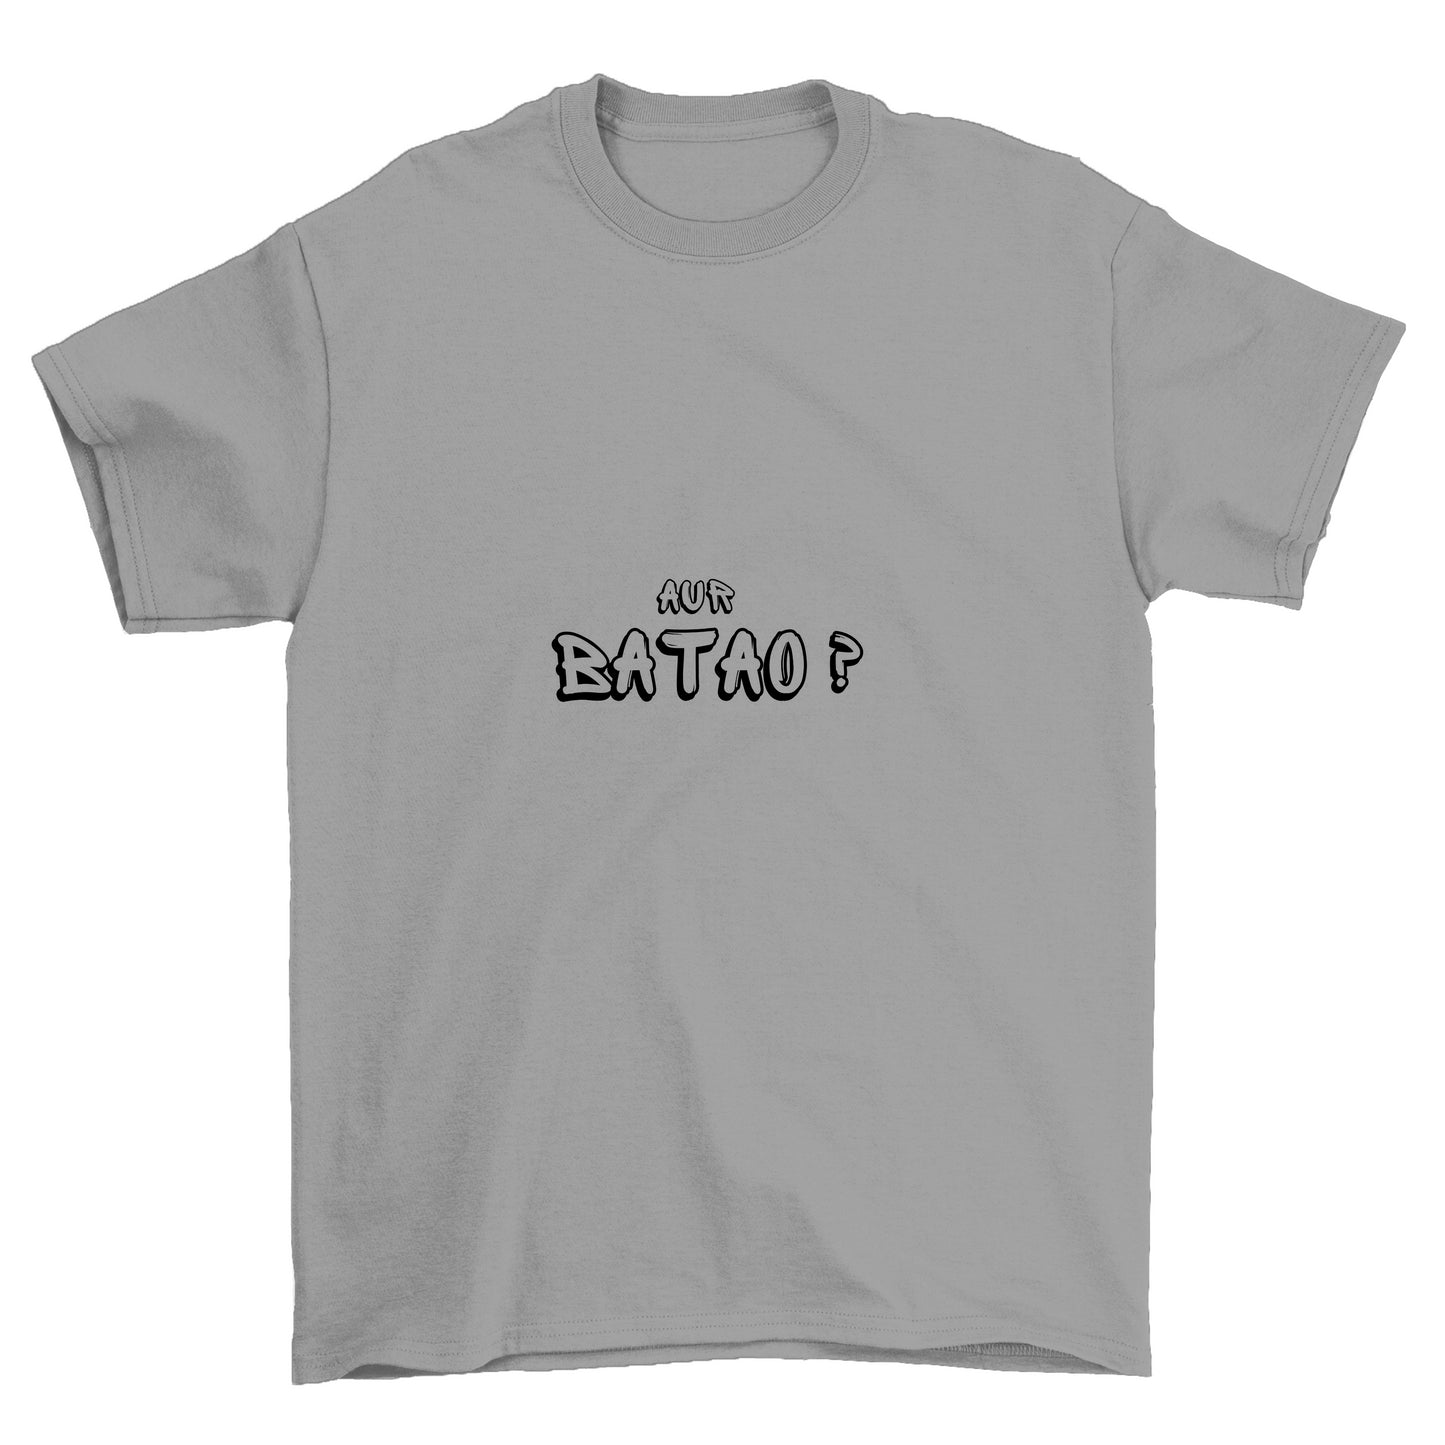 Swag Collection Men's Basic Cotton Tshirt